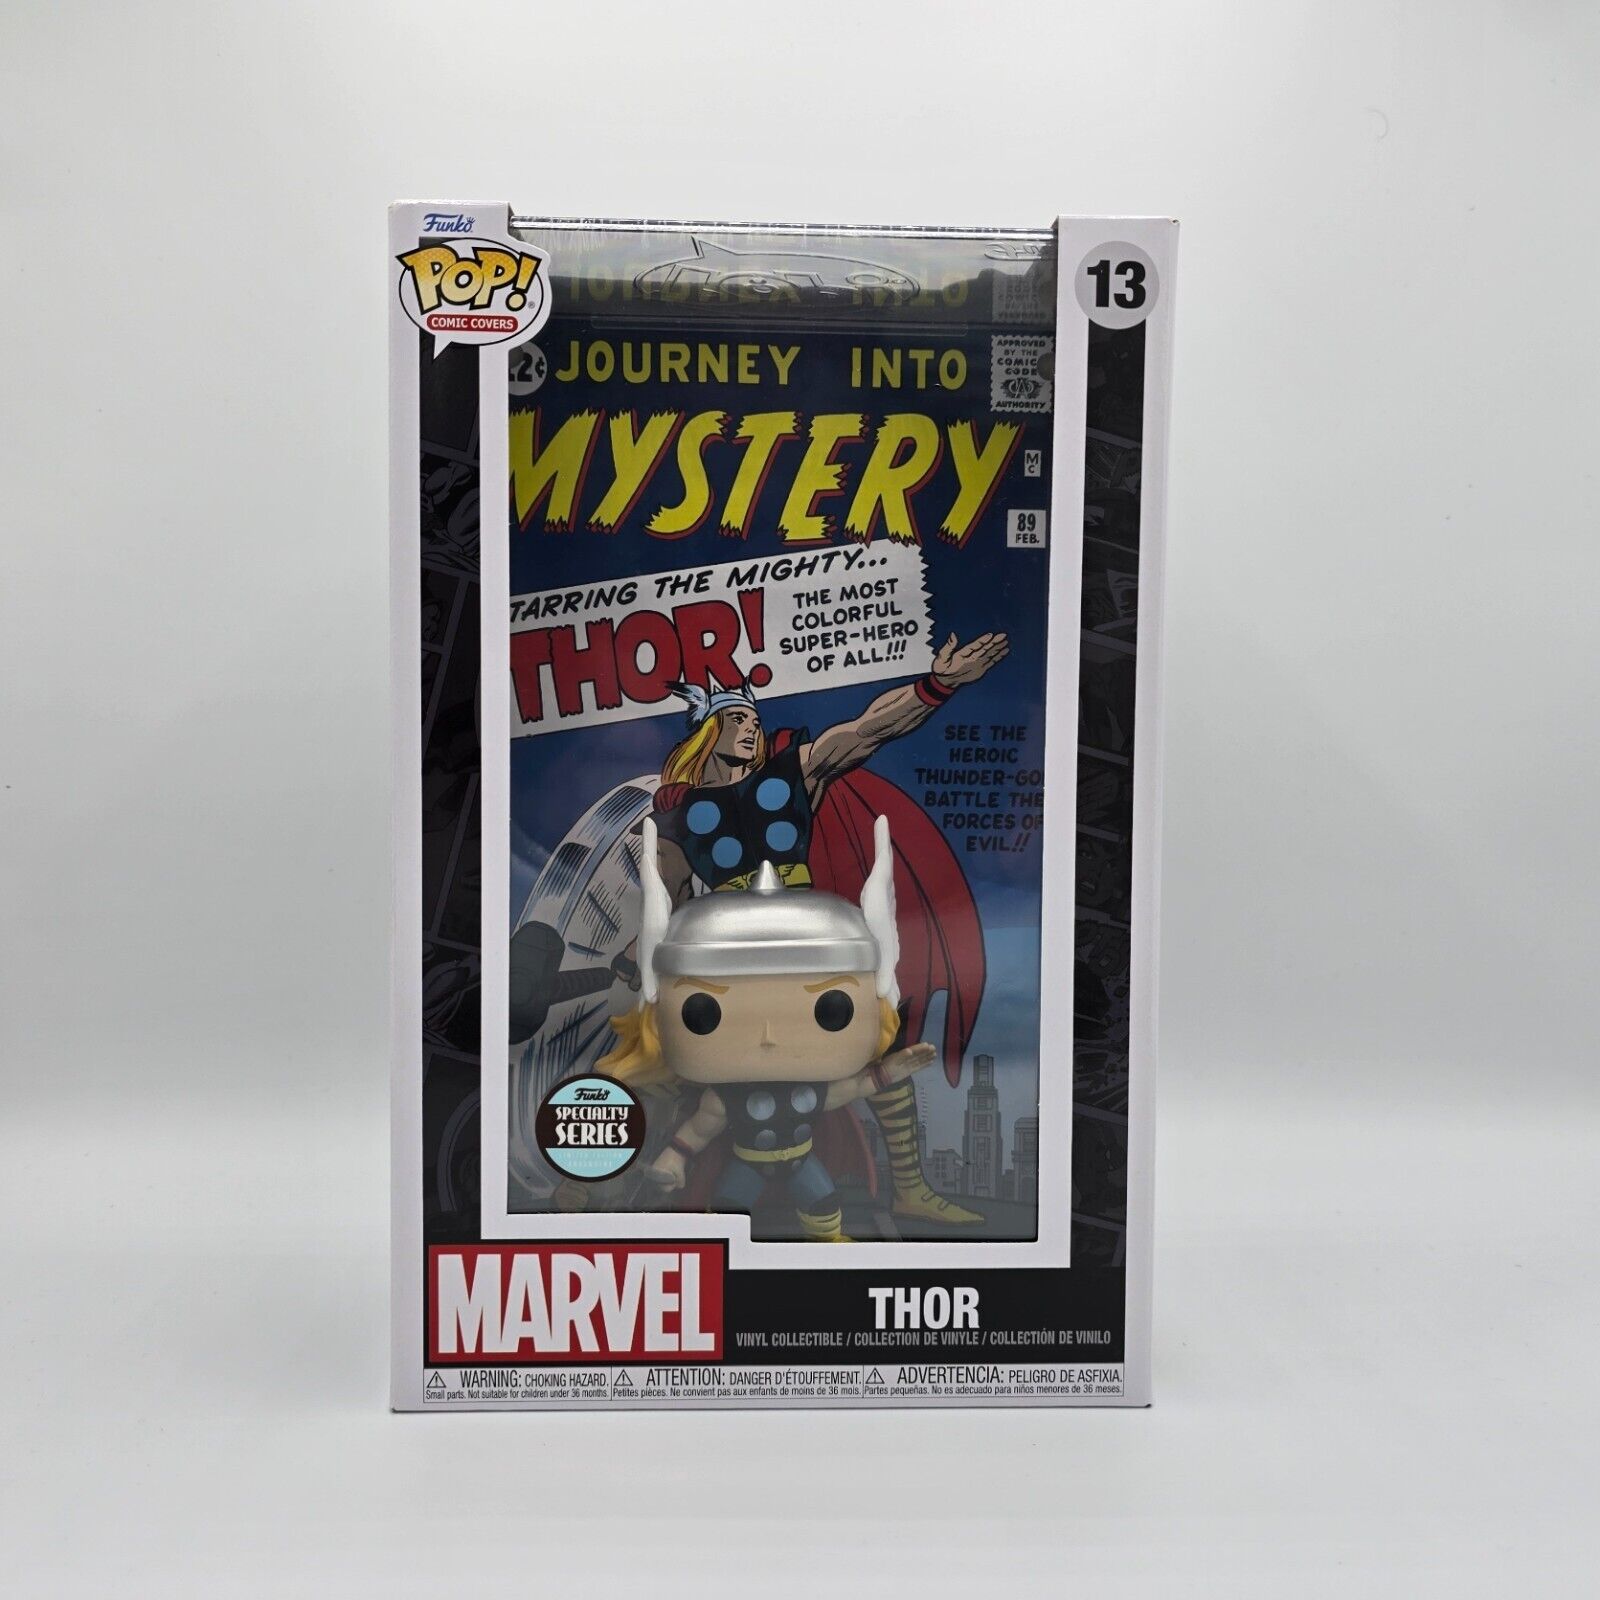 FUNKO POP Comic Cover Marvel Classic Thor Funko Specialty Series Exclusive #13